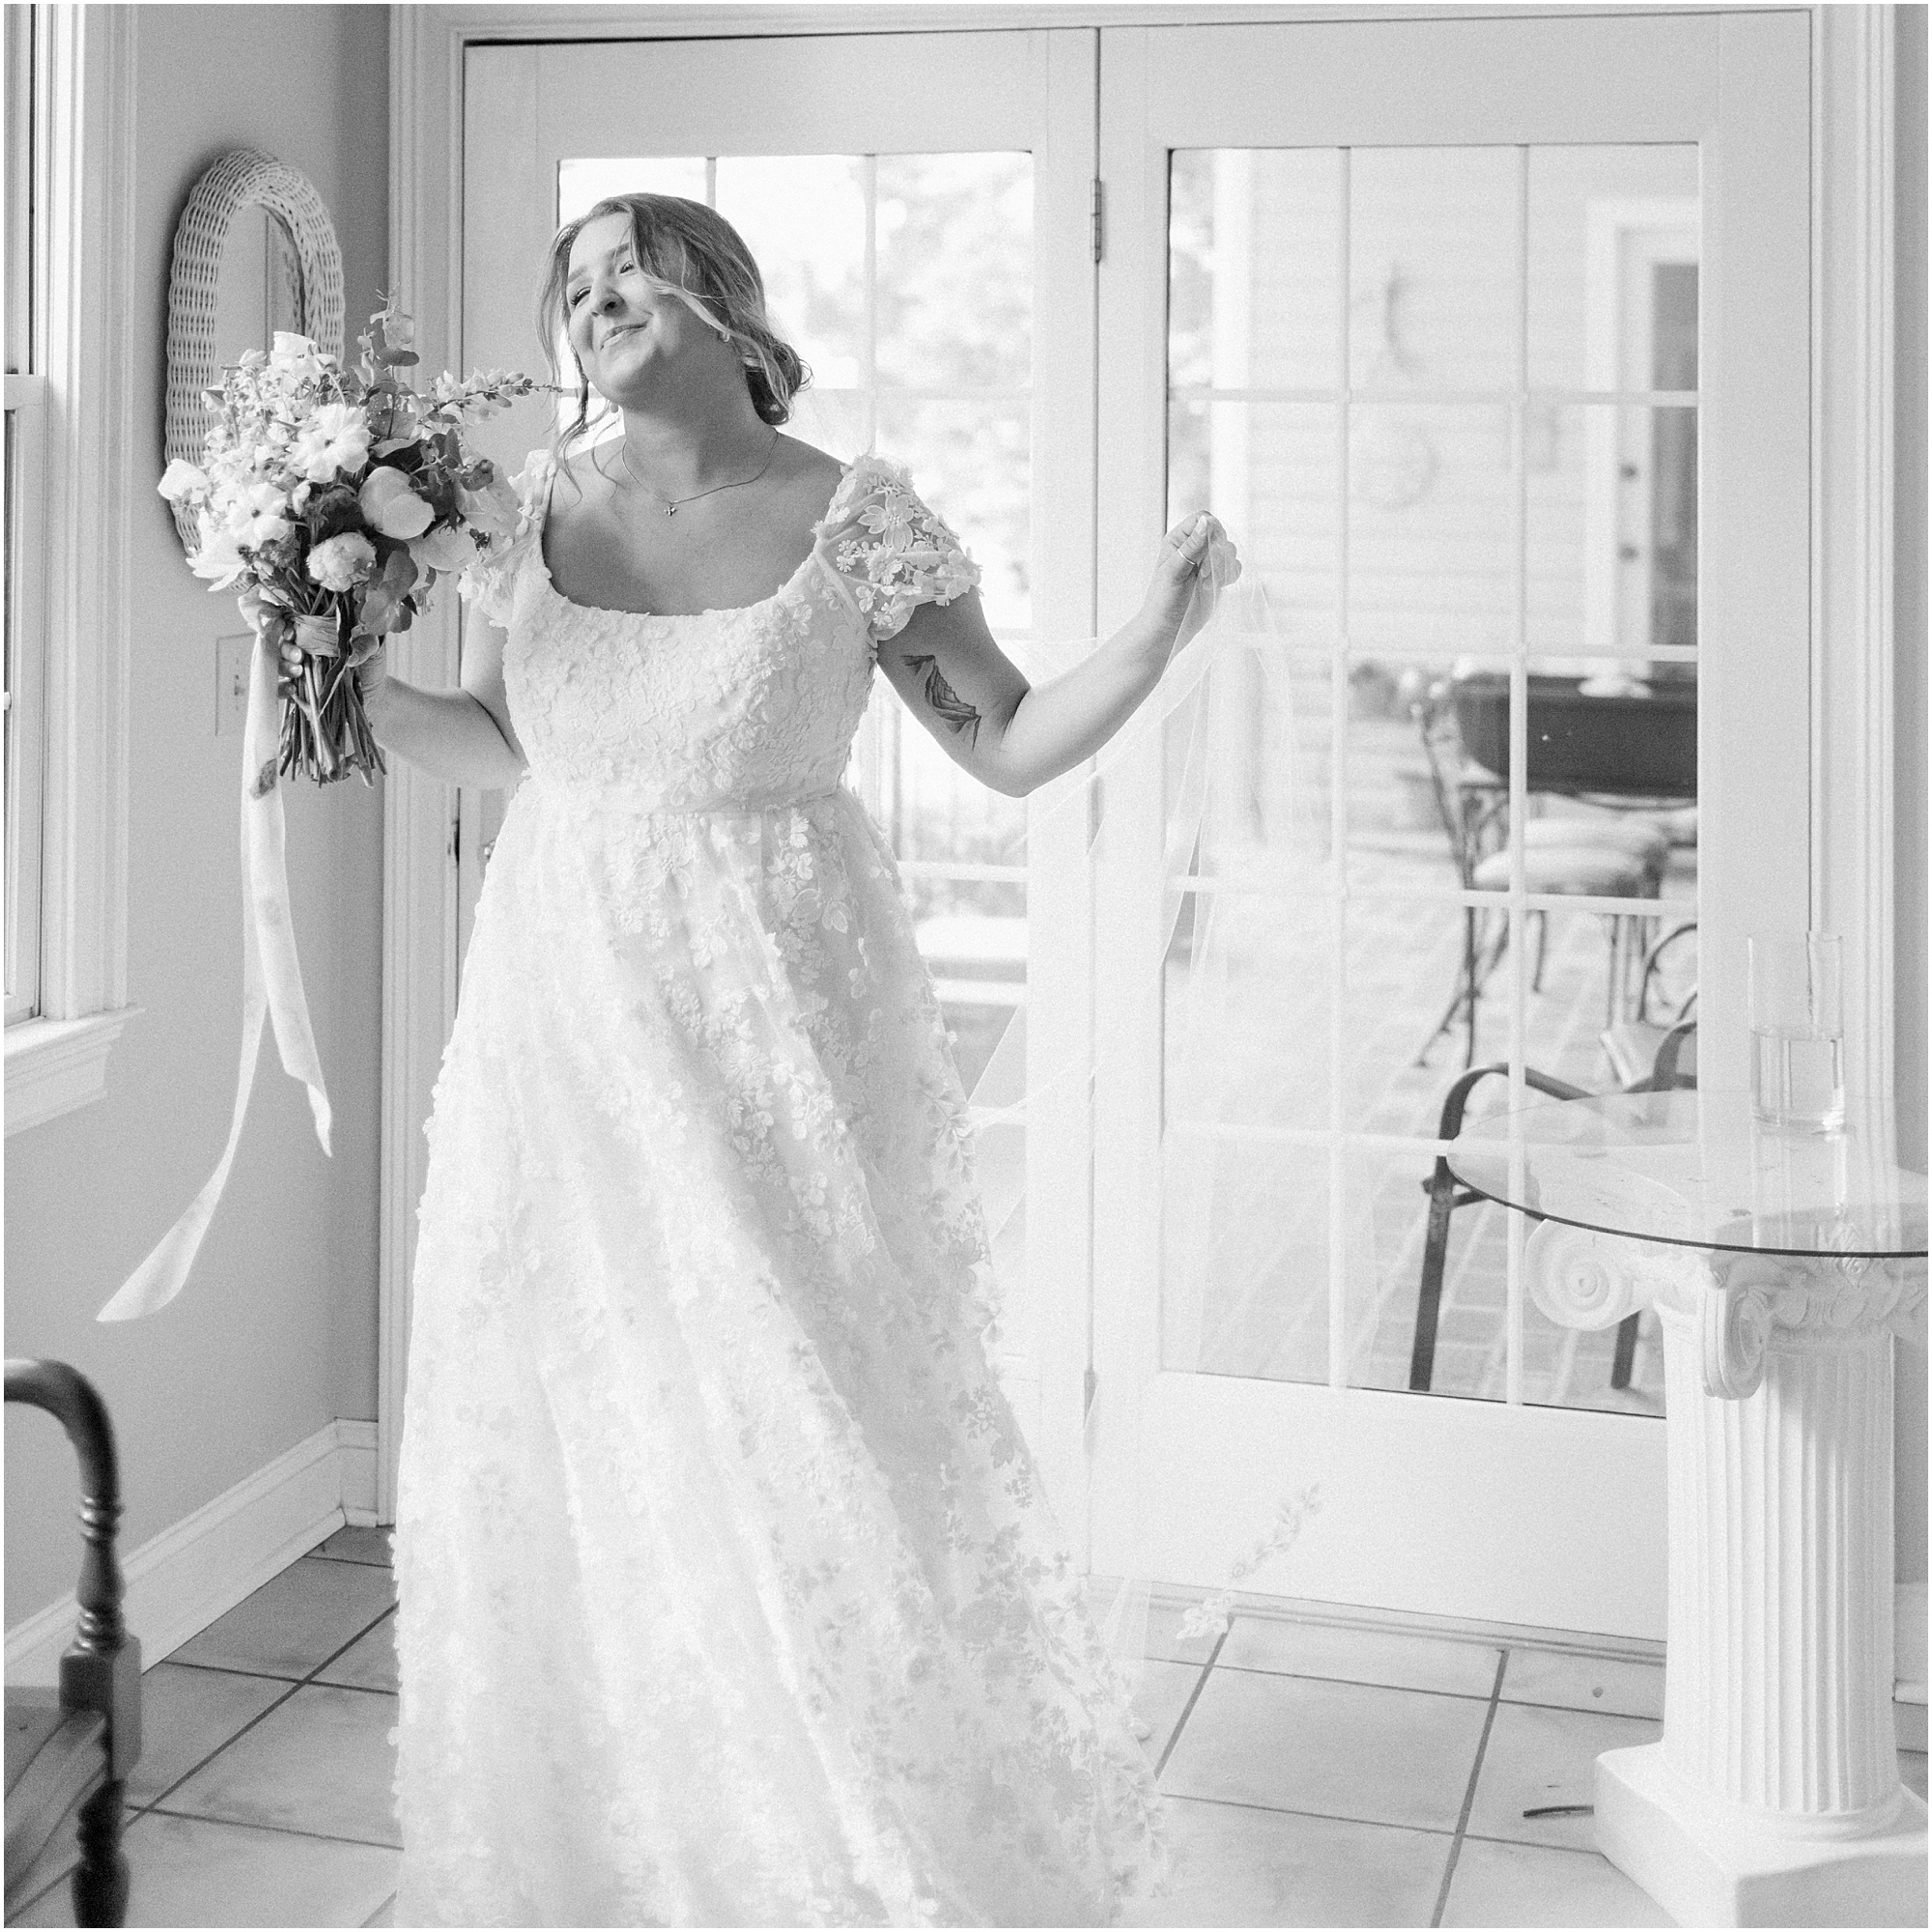 Bride laughing and spinning around in her wedding dress. Black and white photo of bride dancing in her wedding dress.